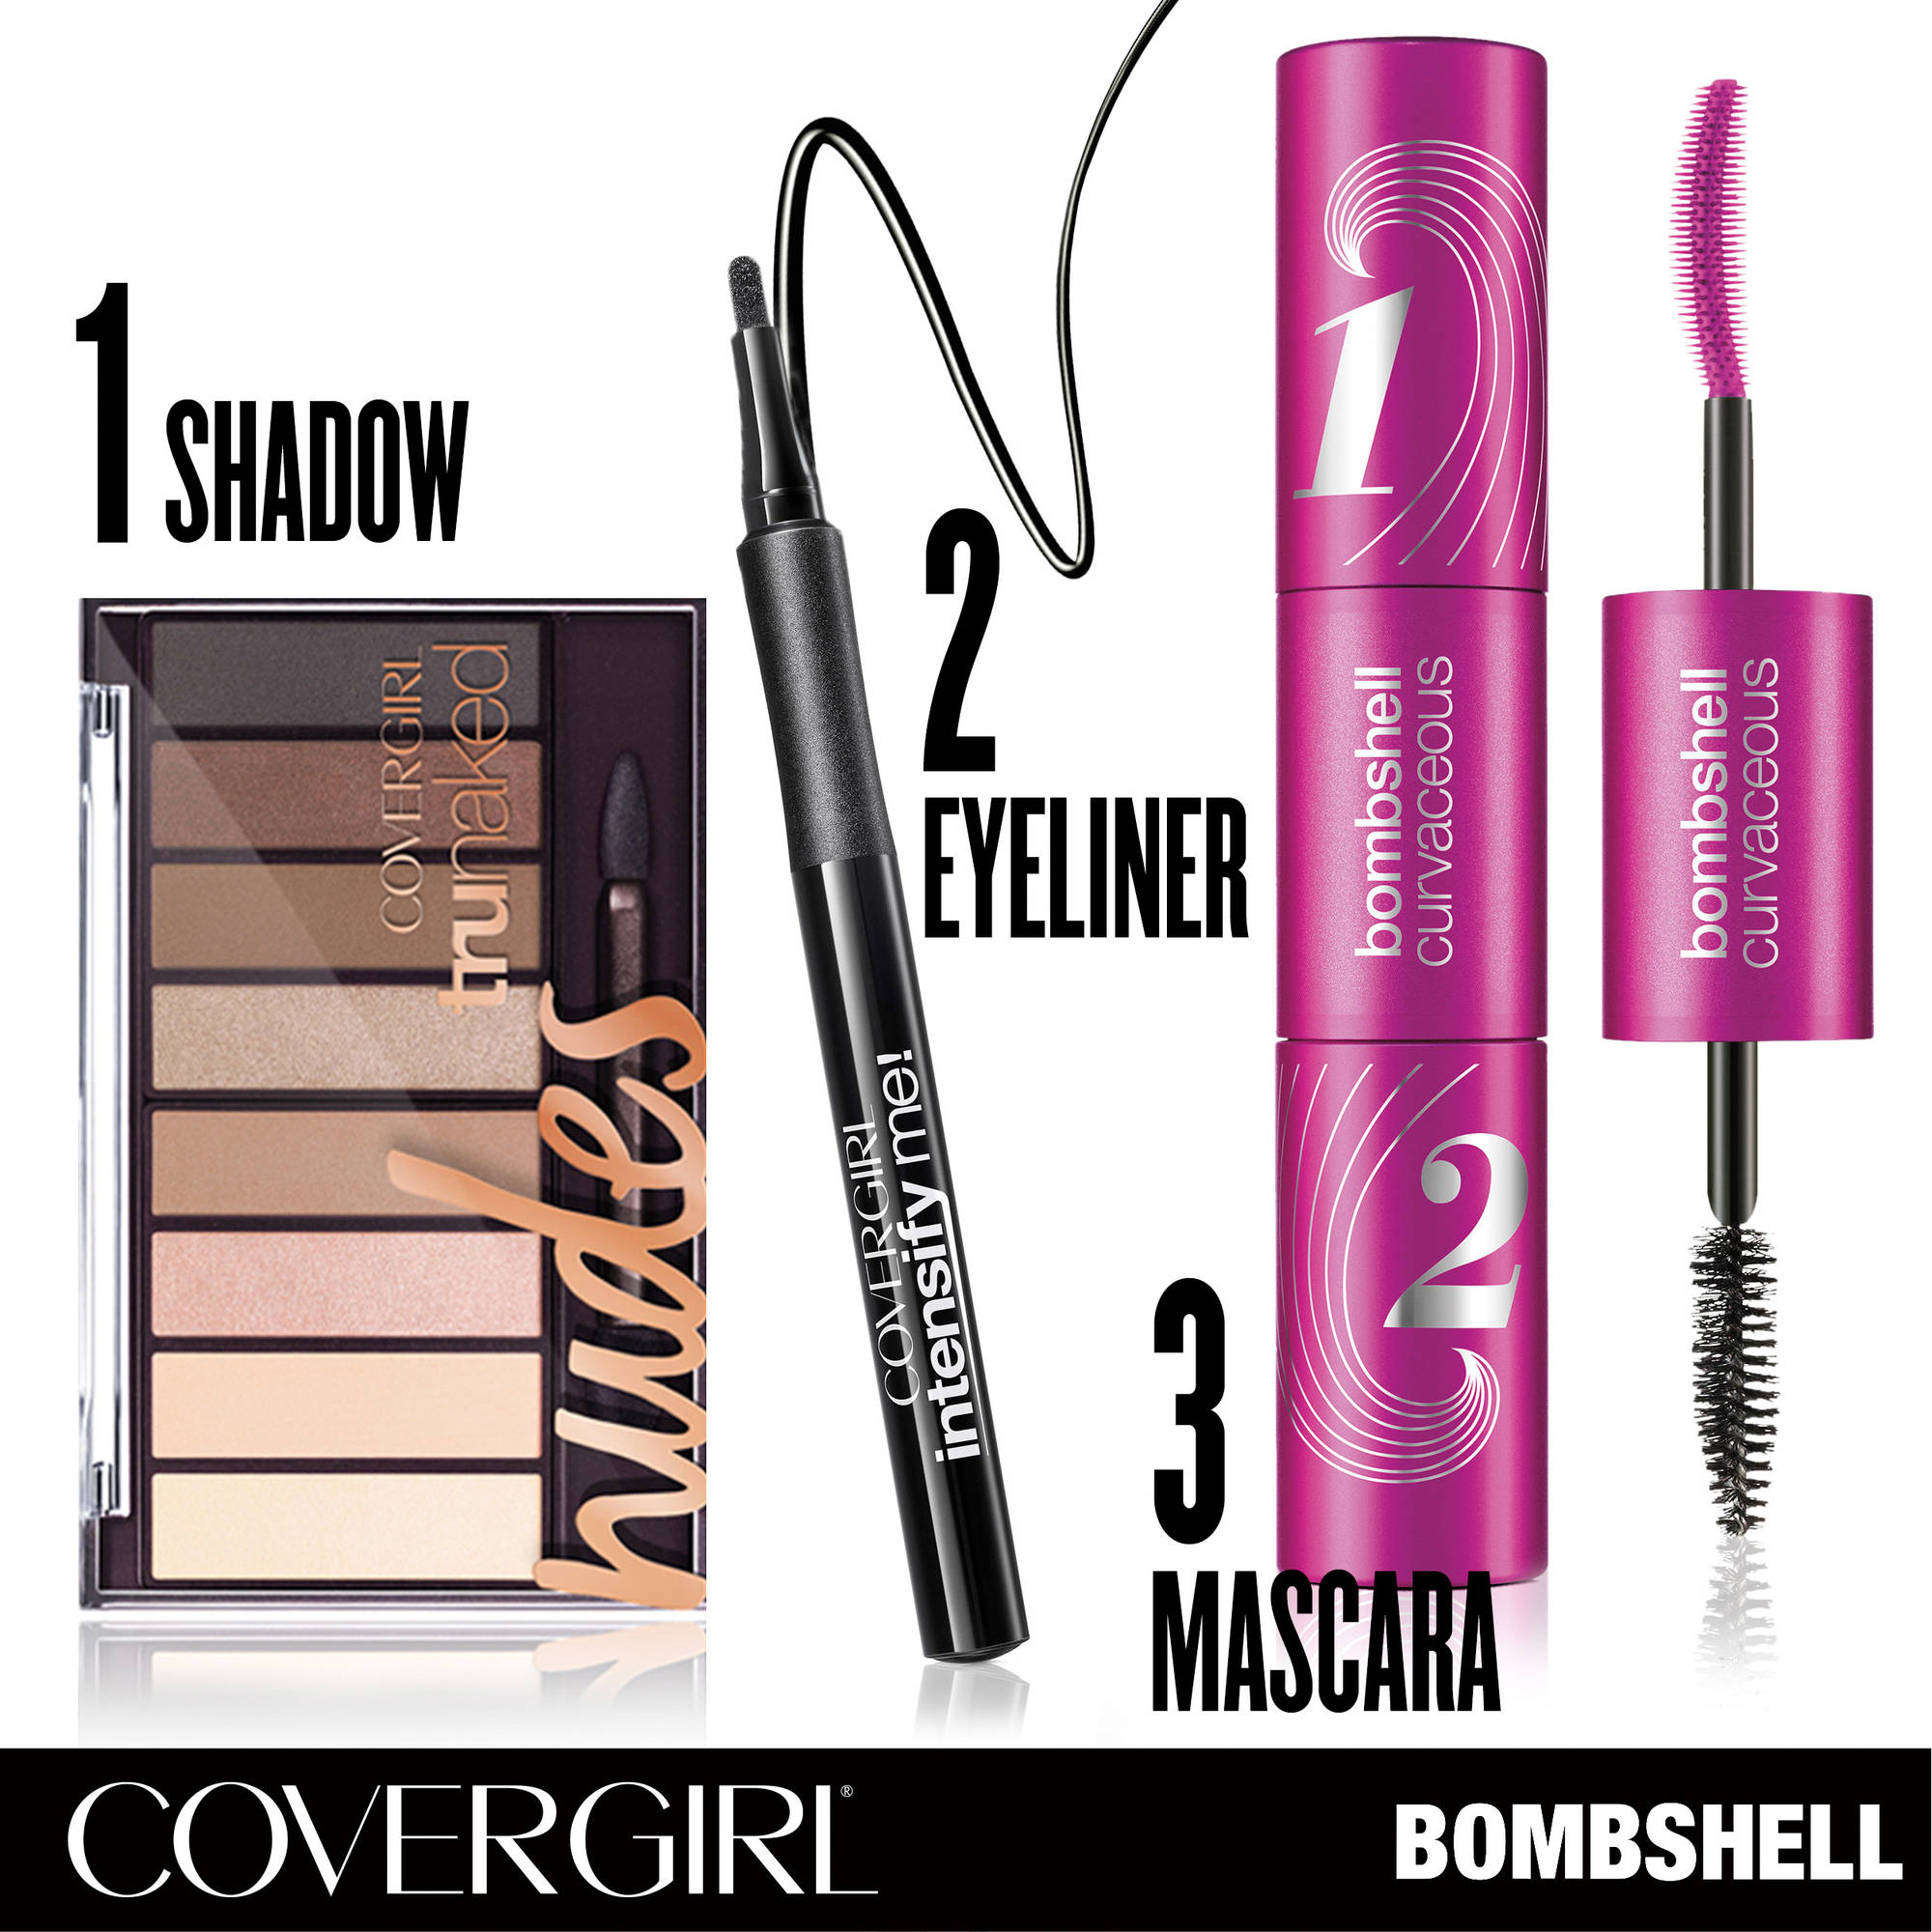 COVERGIRL Bombshell Curvaceous by LashBlast Mascara, Very Black - image 4 of 5